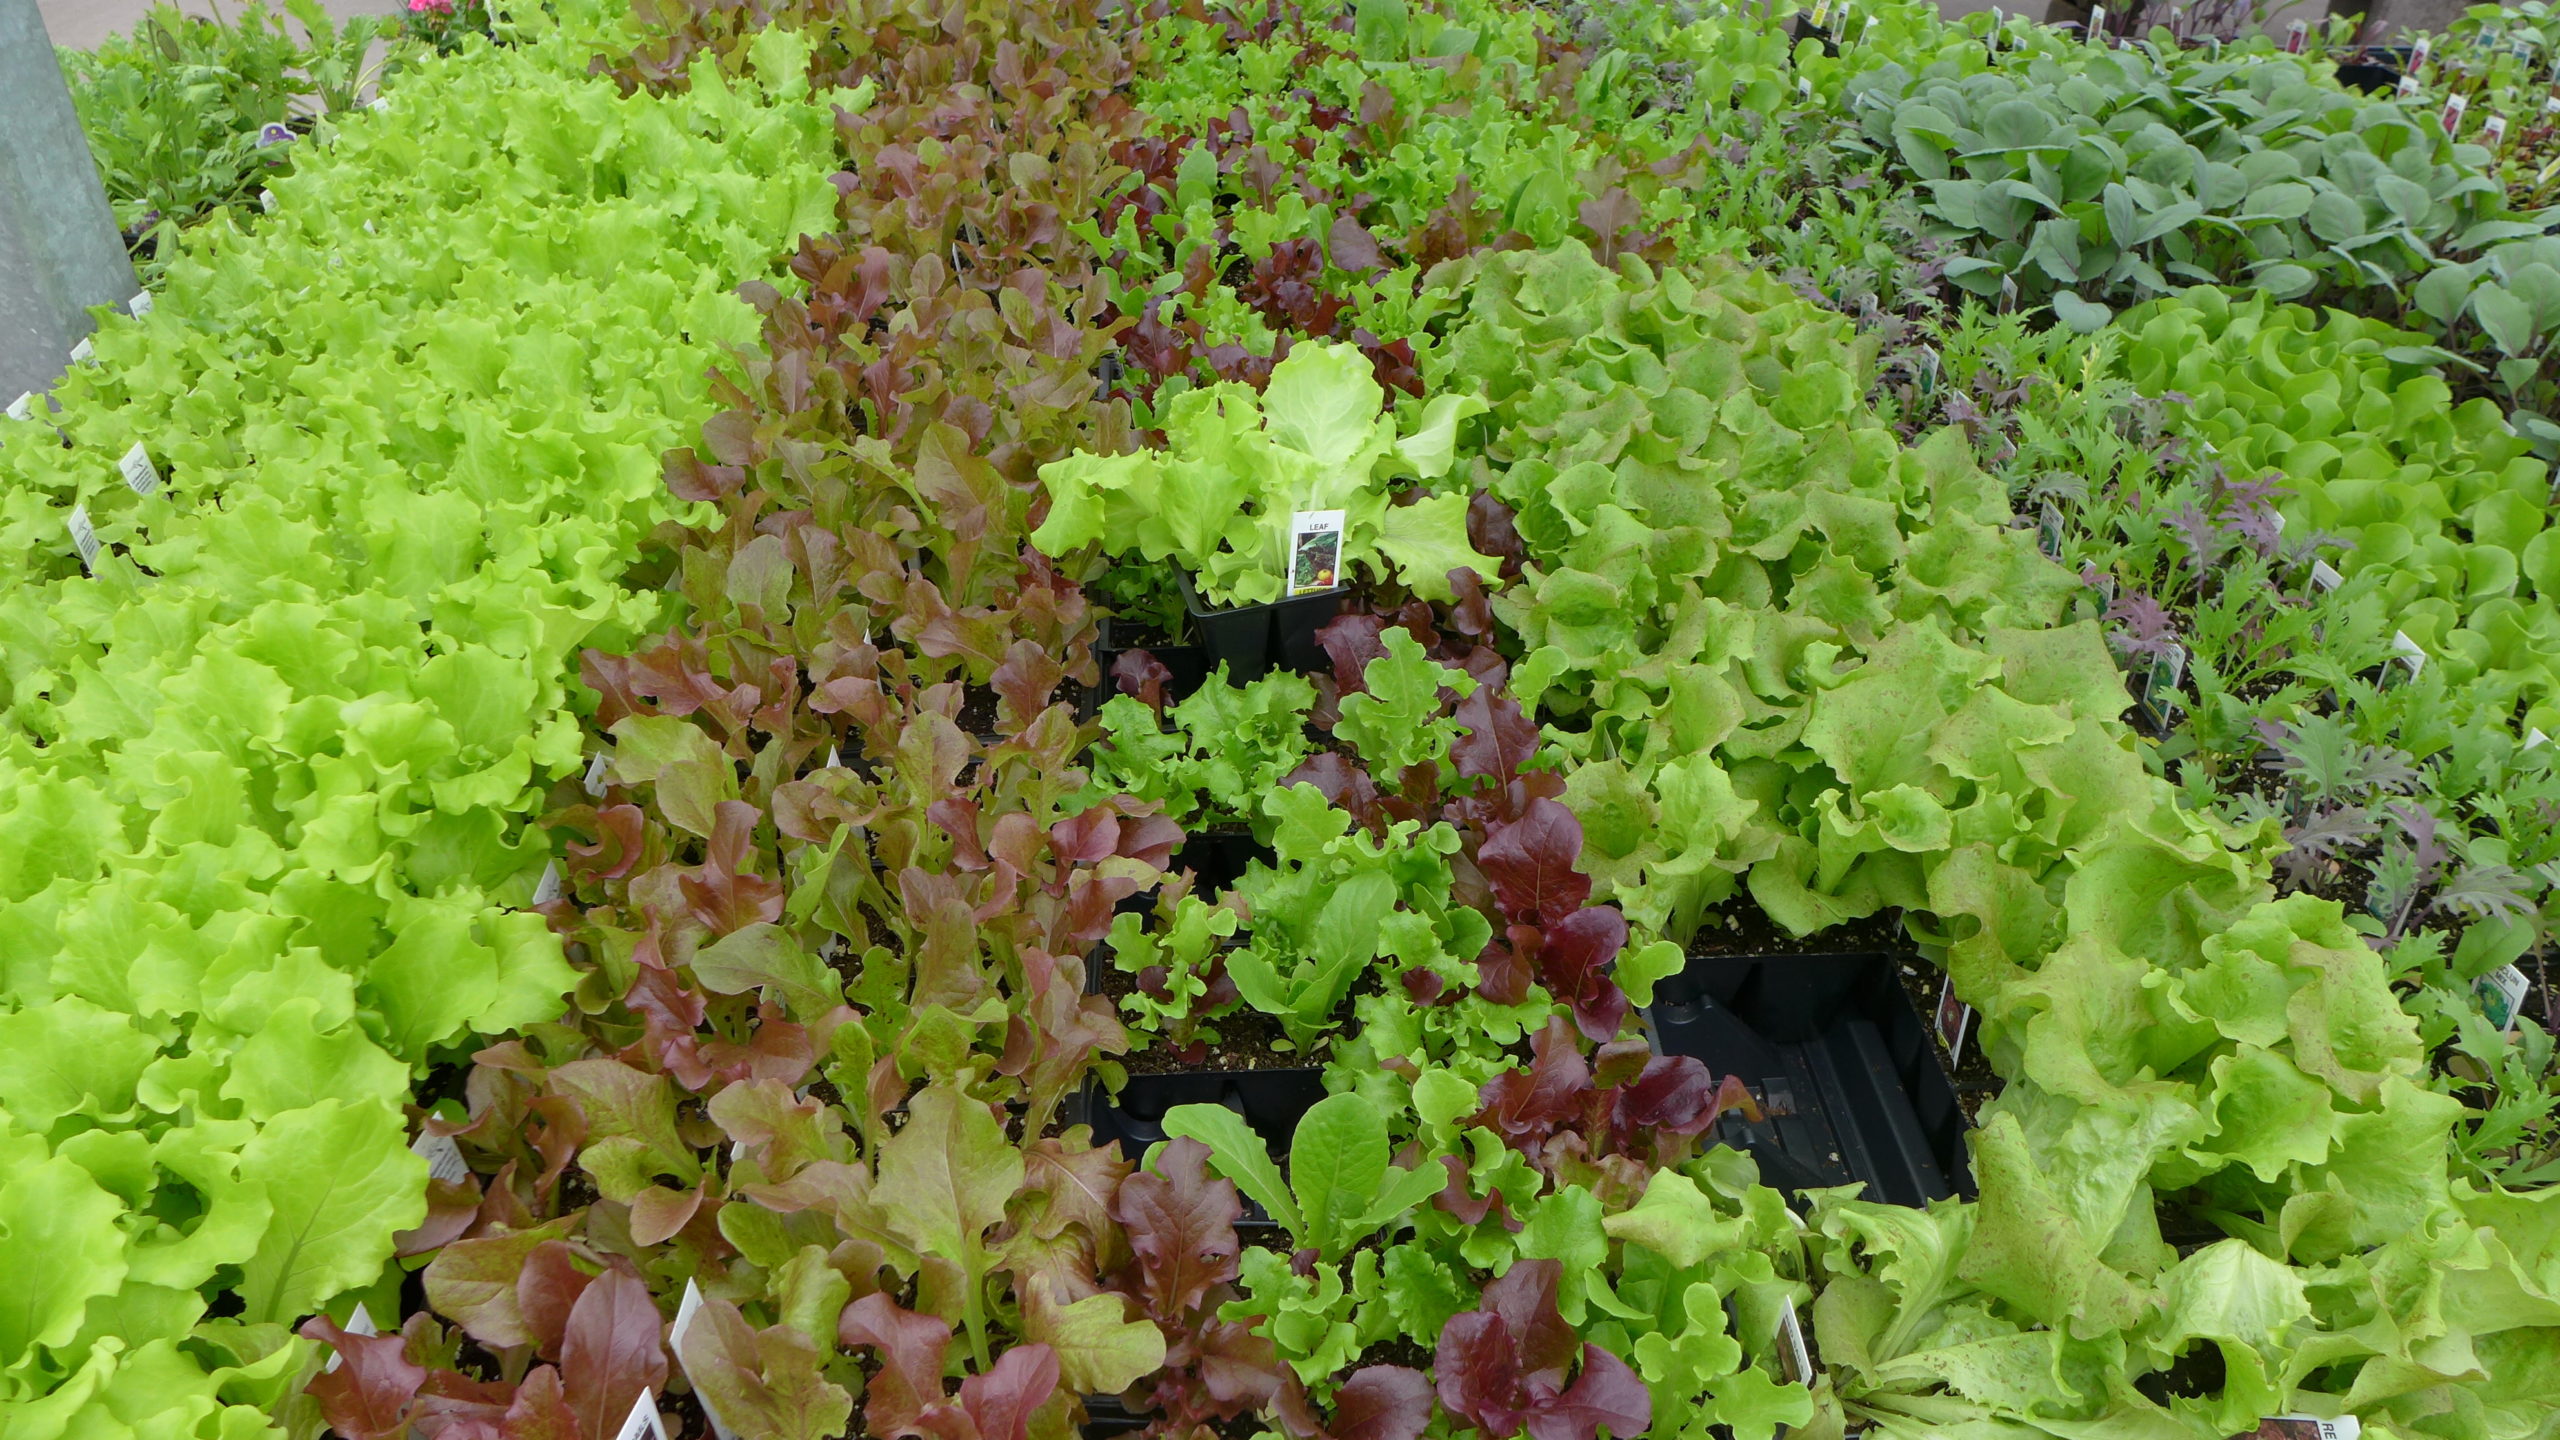 It will be several weeks before local garden centers have cell packs of salad greens ready for your garden, but if you sow your own seeds you can be harvesting in three to four weeks from now. ANDREW MESSINGER